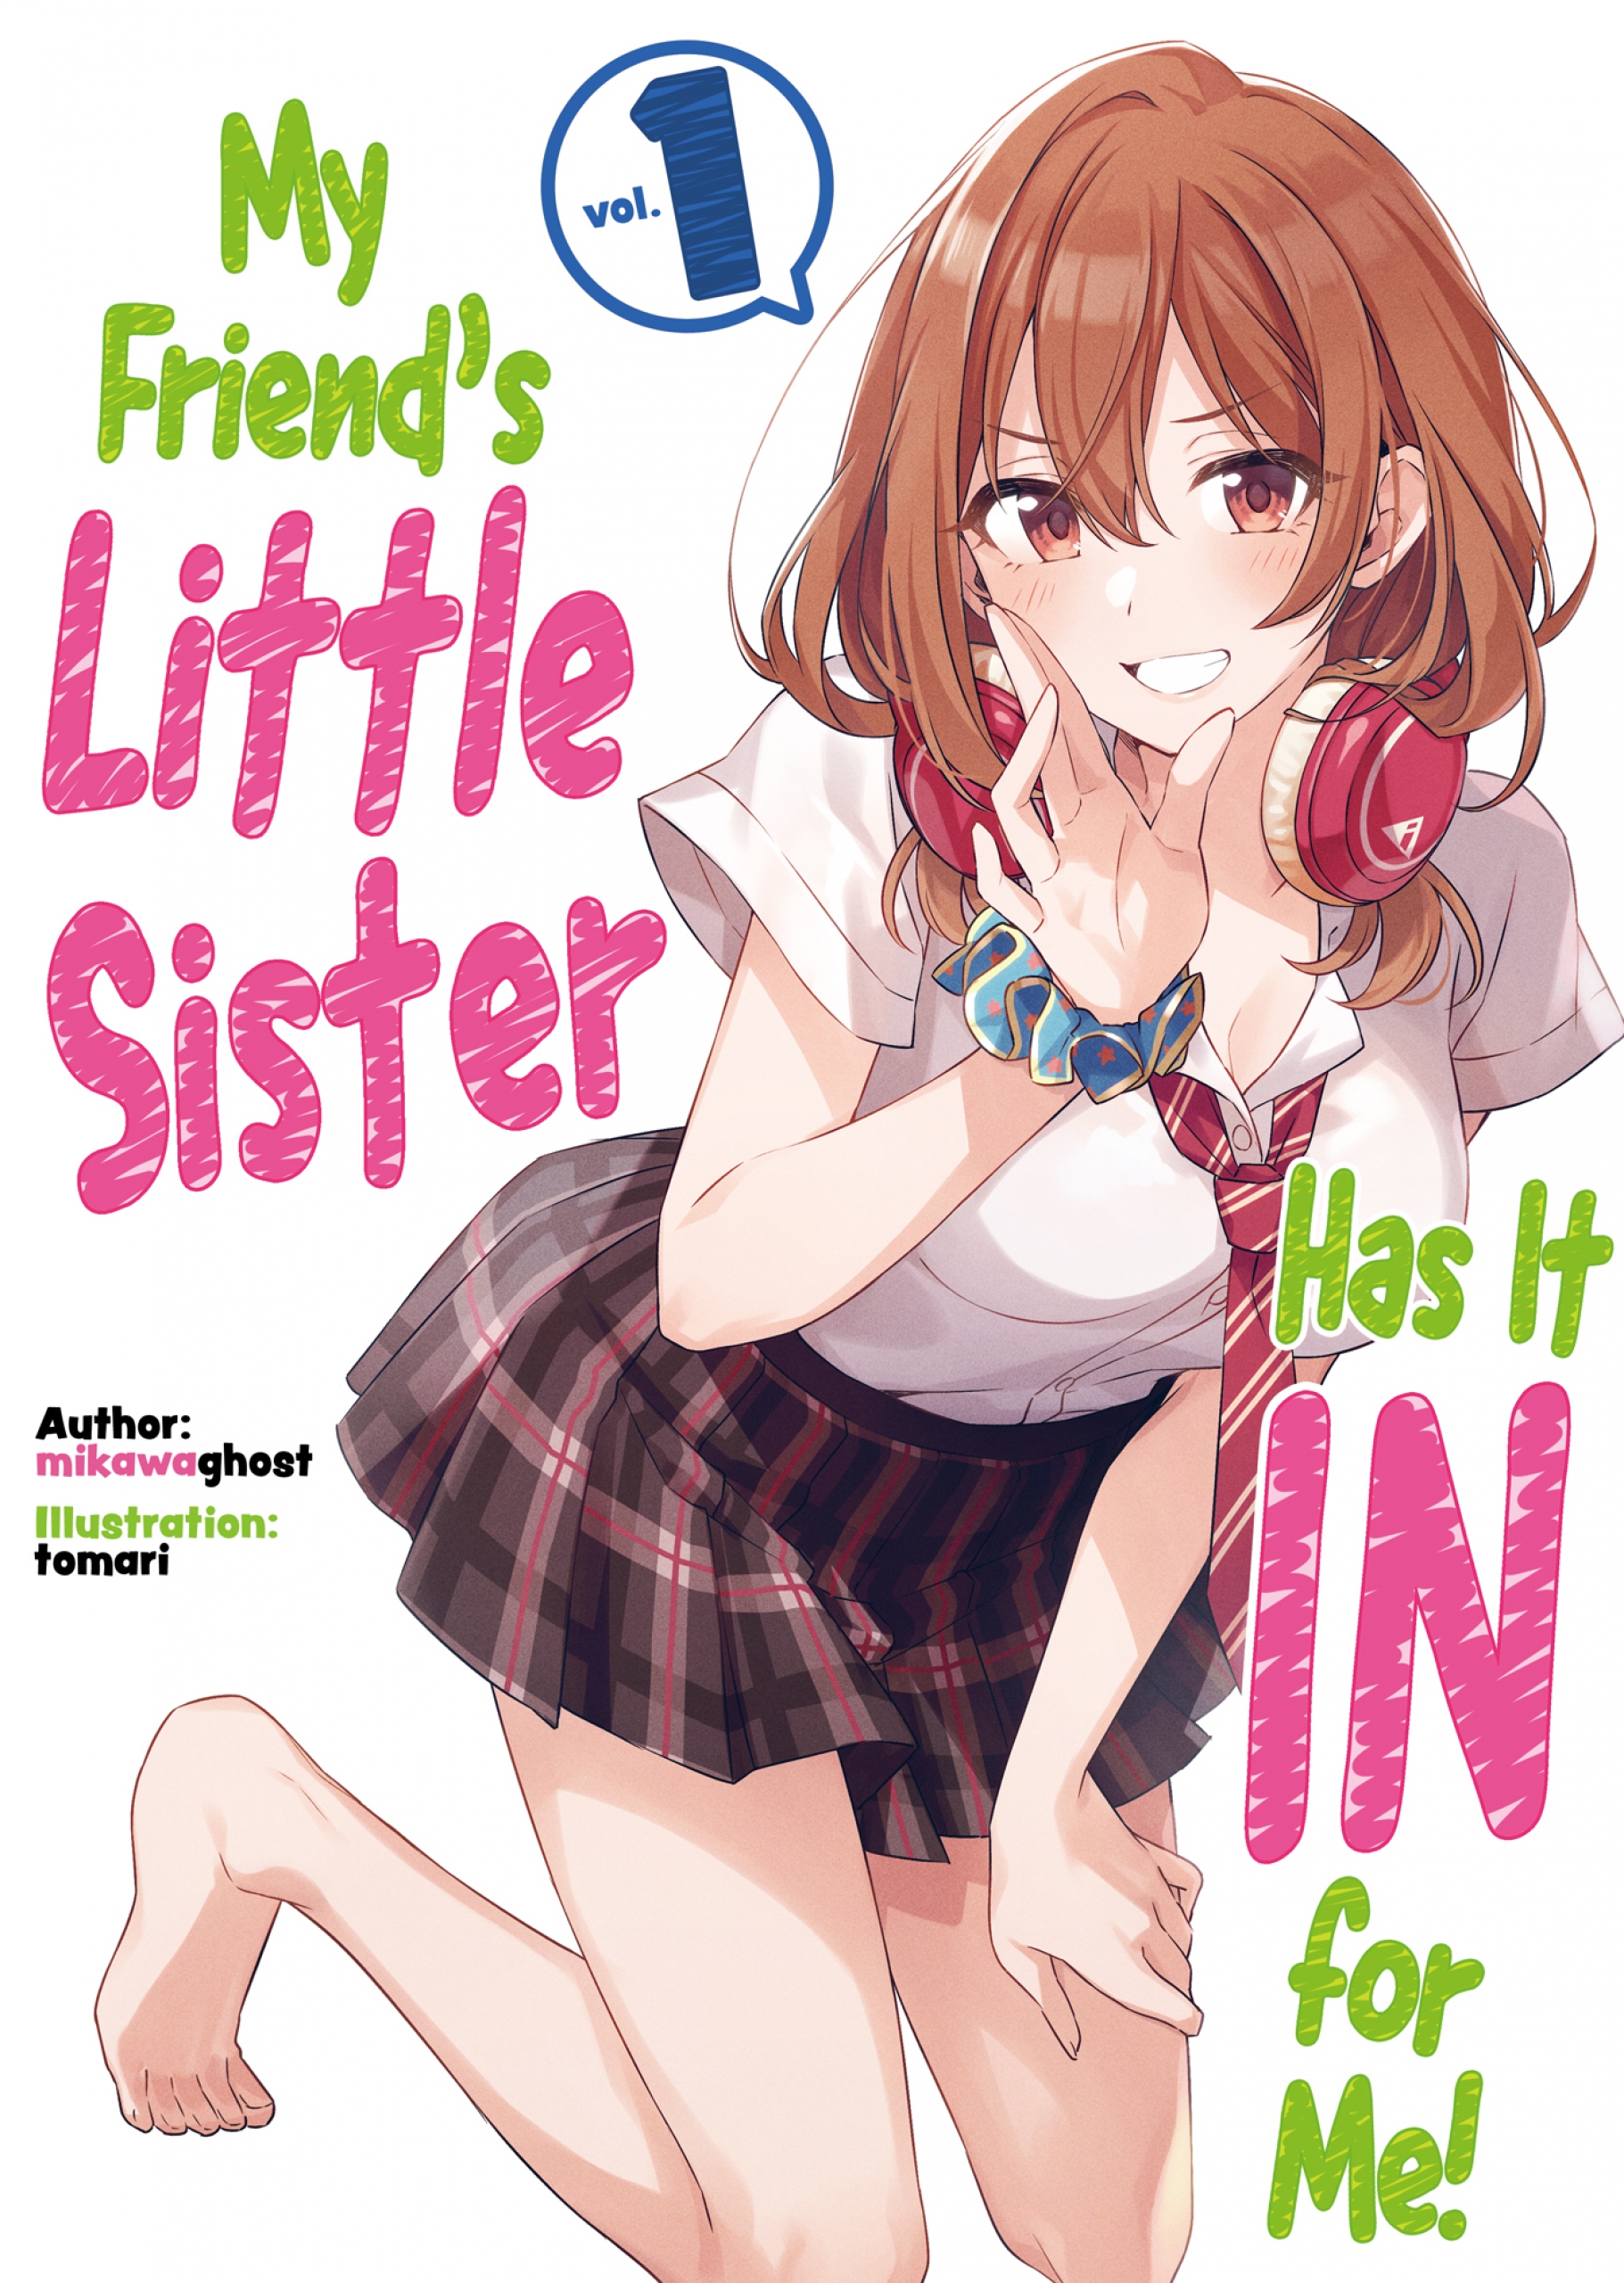 My Friend"s Little Sister Has It In for Me! Volume 1